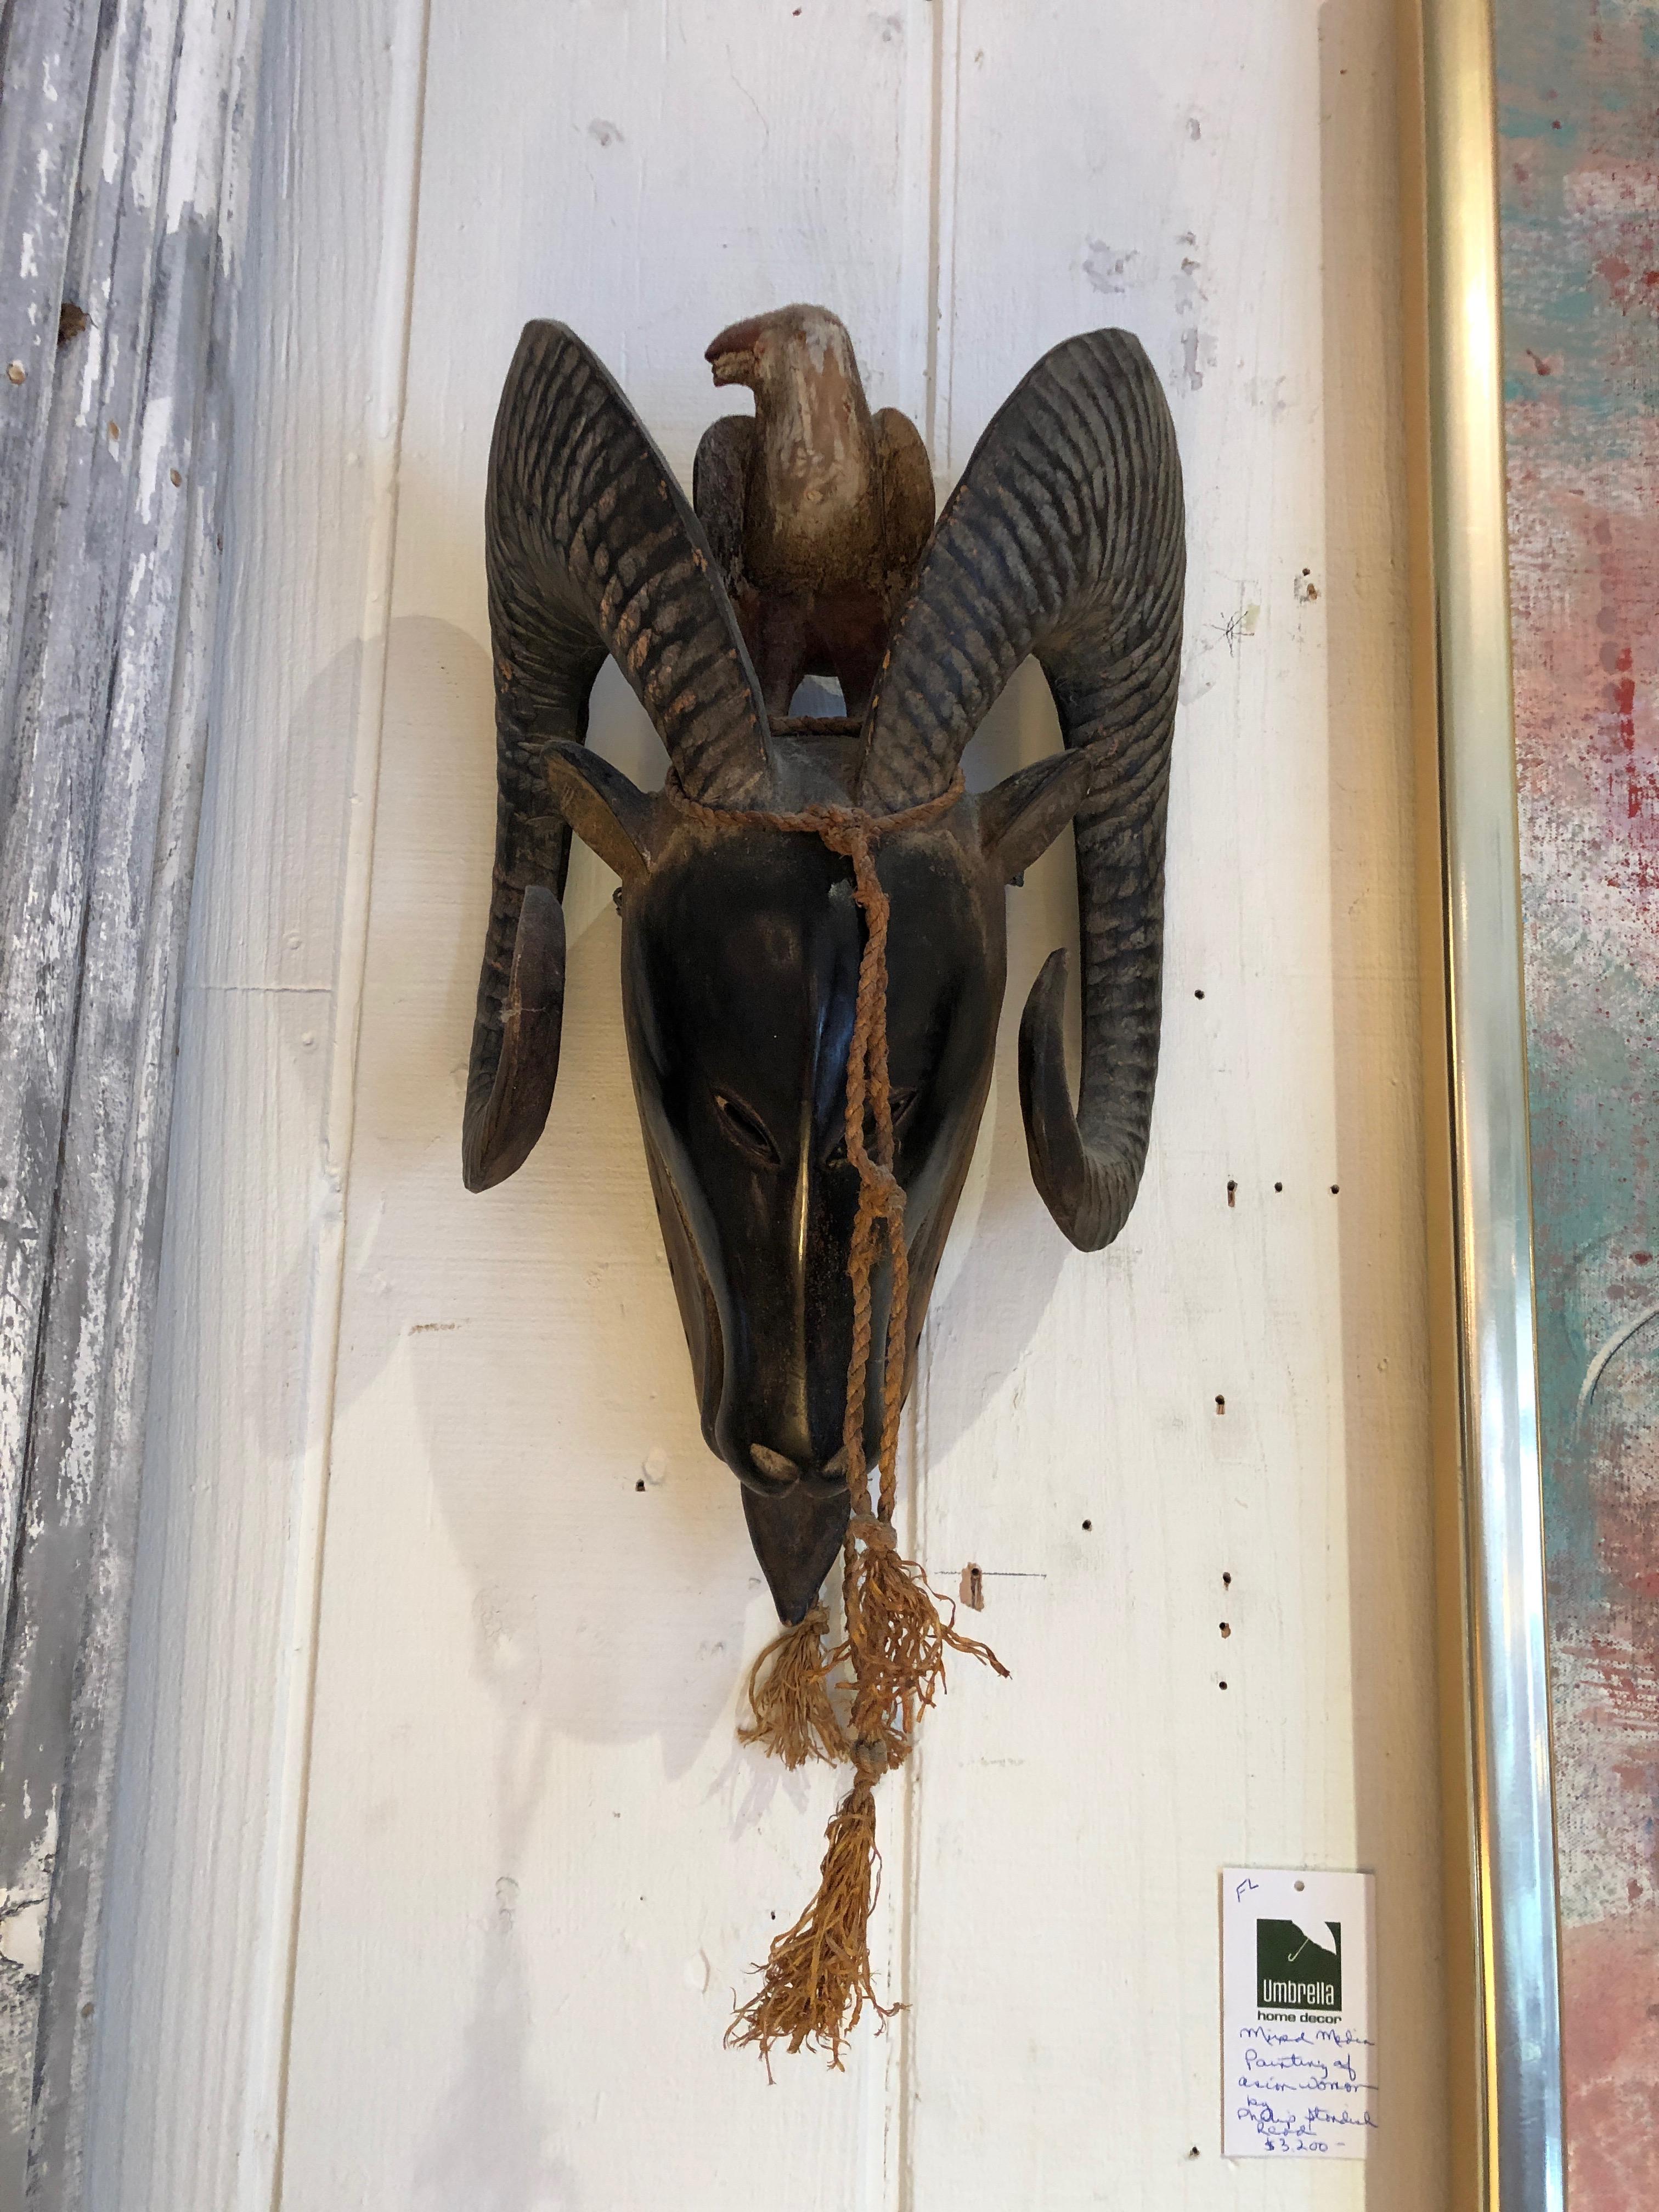 A striking wall sculpture from Africa that's a tribal mask of a stylized ram having smooth face with slanted eye holes and curly horns. A carved wood bird rests atop the head looking out between the horns.